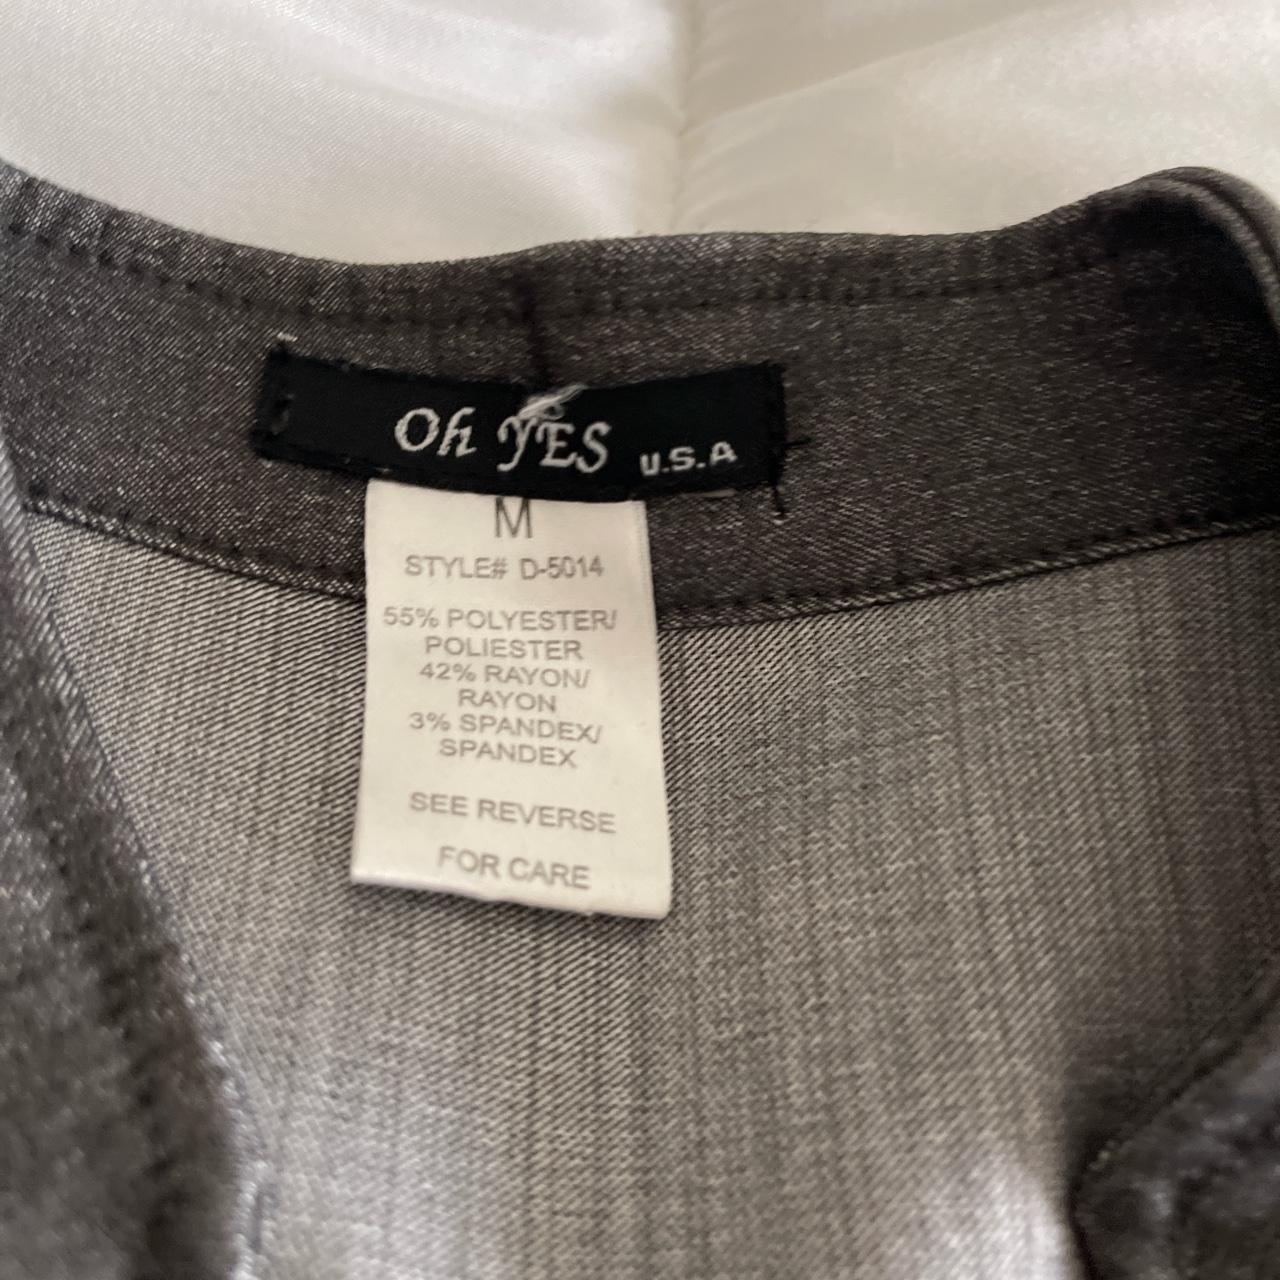 Oh yes brand button vest - Depop